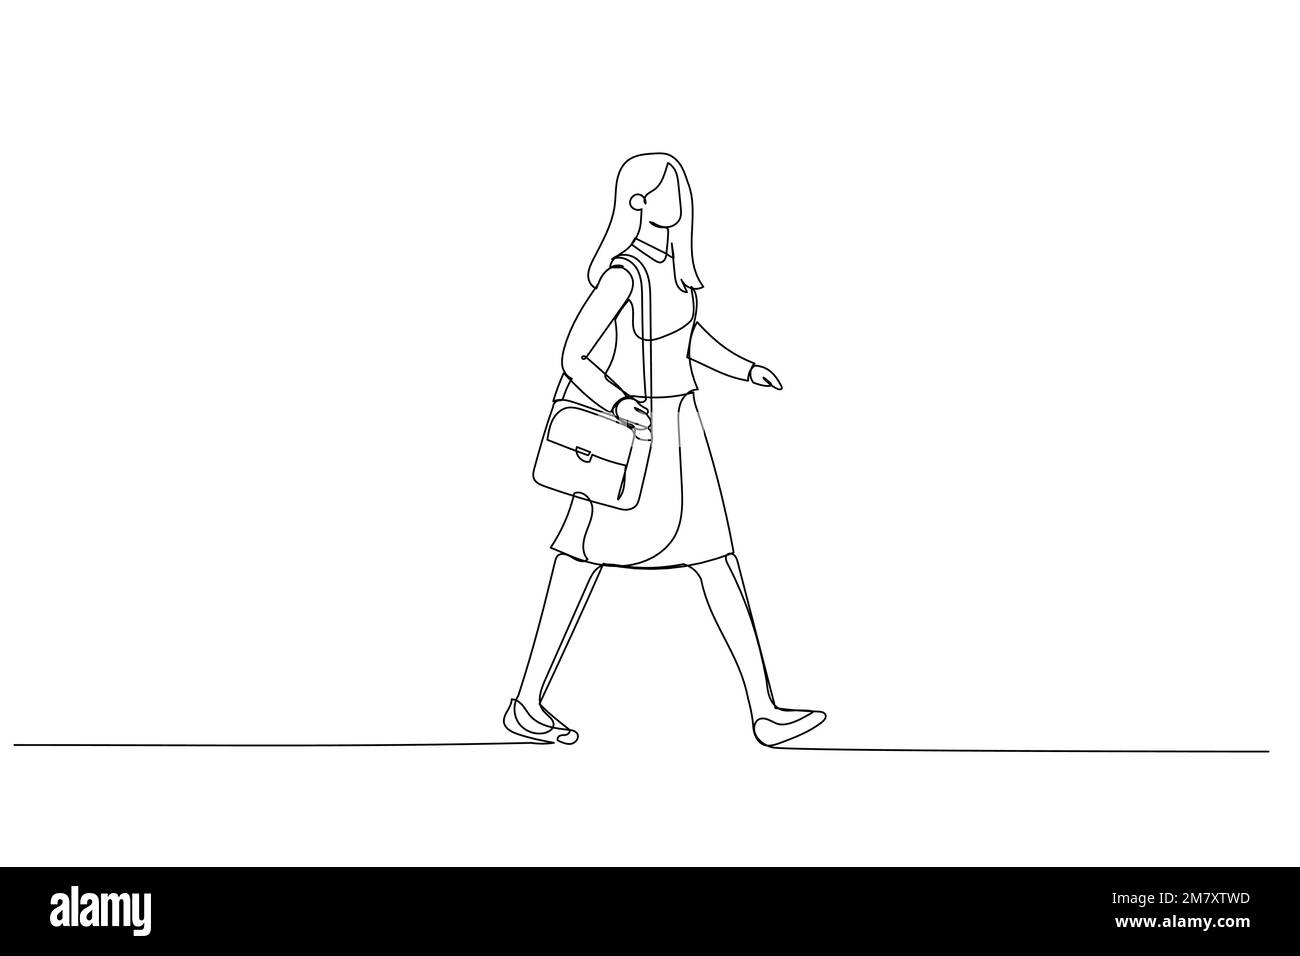 Illustration of businesswoman walking in a hurry past for business travel. Single continuous line art style Stock Vector